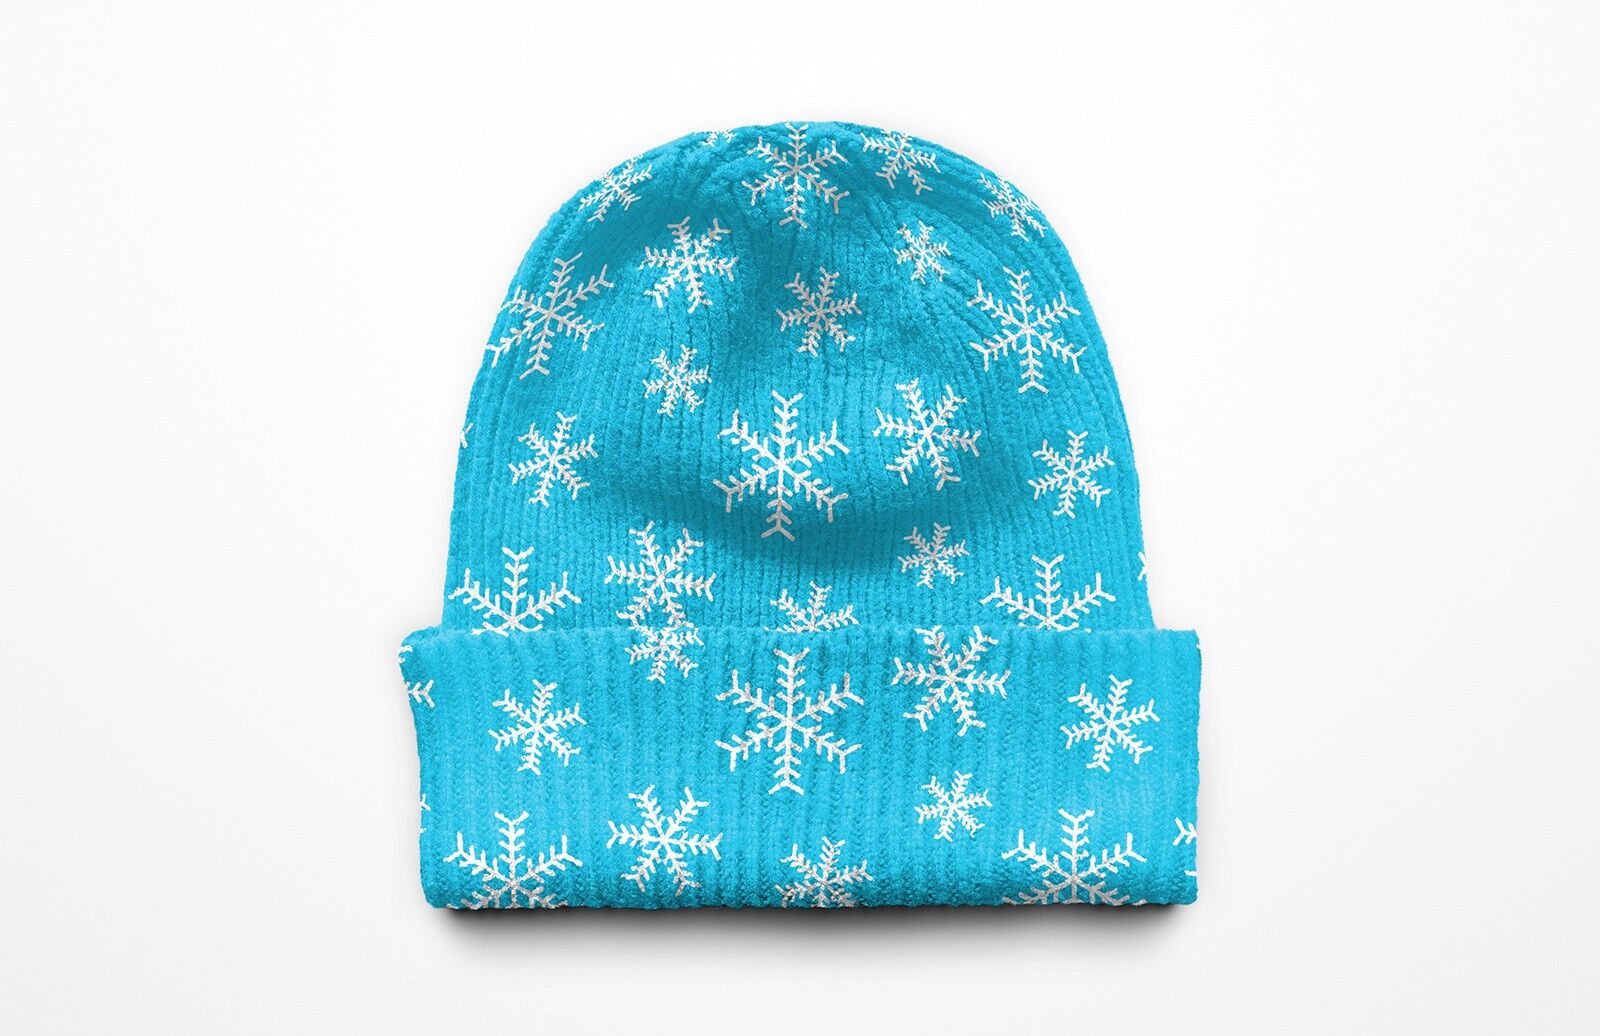 Mockup Showing a Photo-realistic Beanie Hat FREE PSD